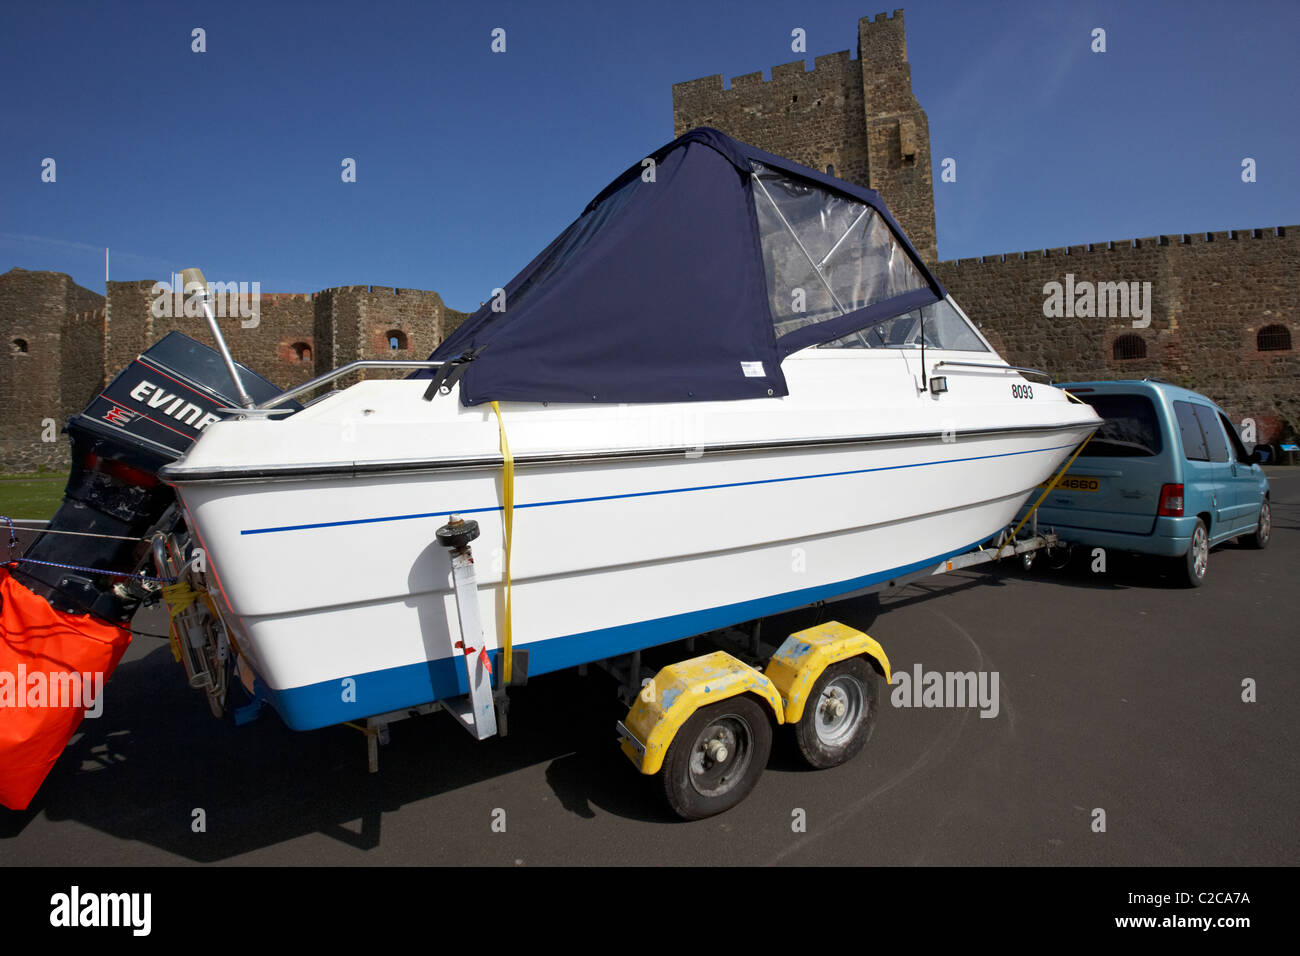 car towing boat on trailer in the uk Stock Photo